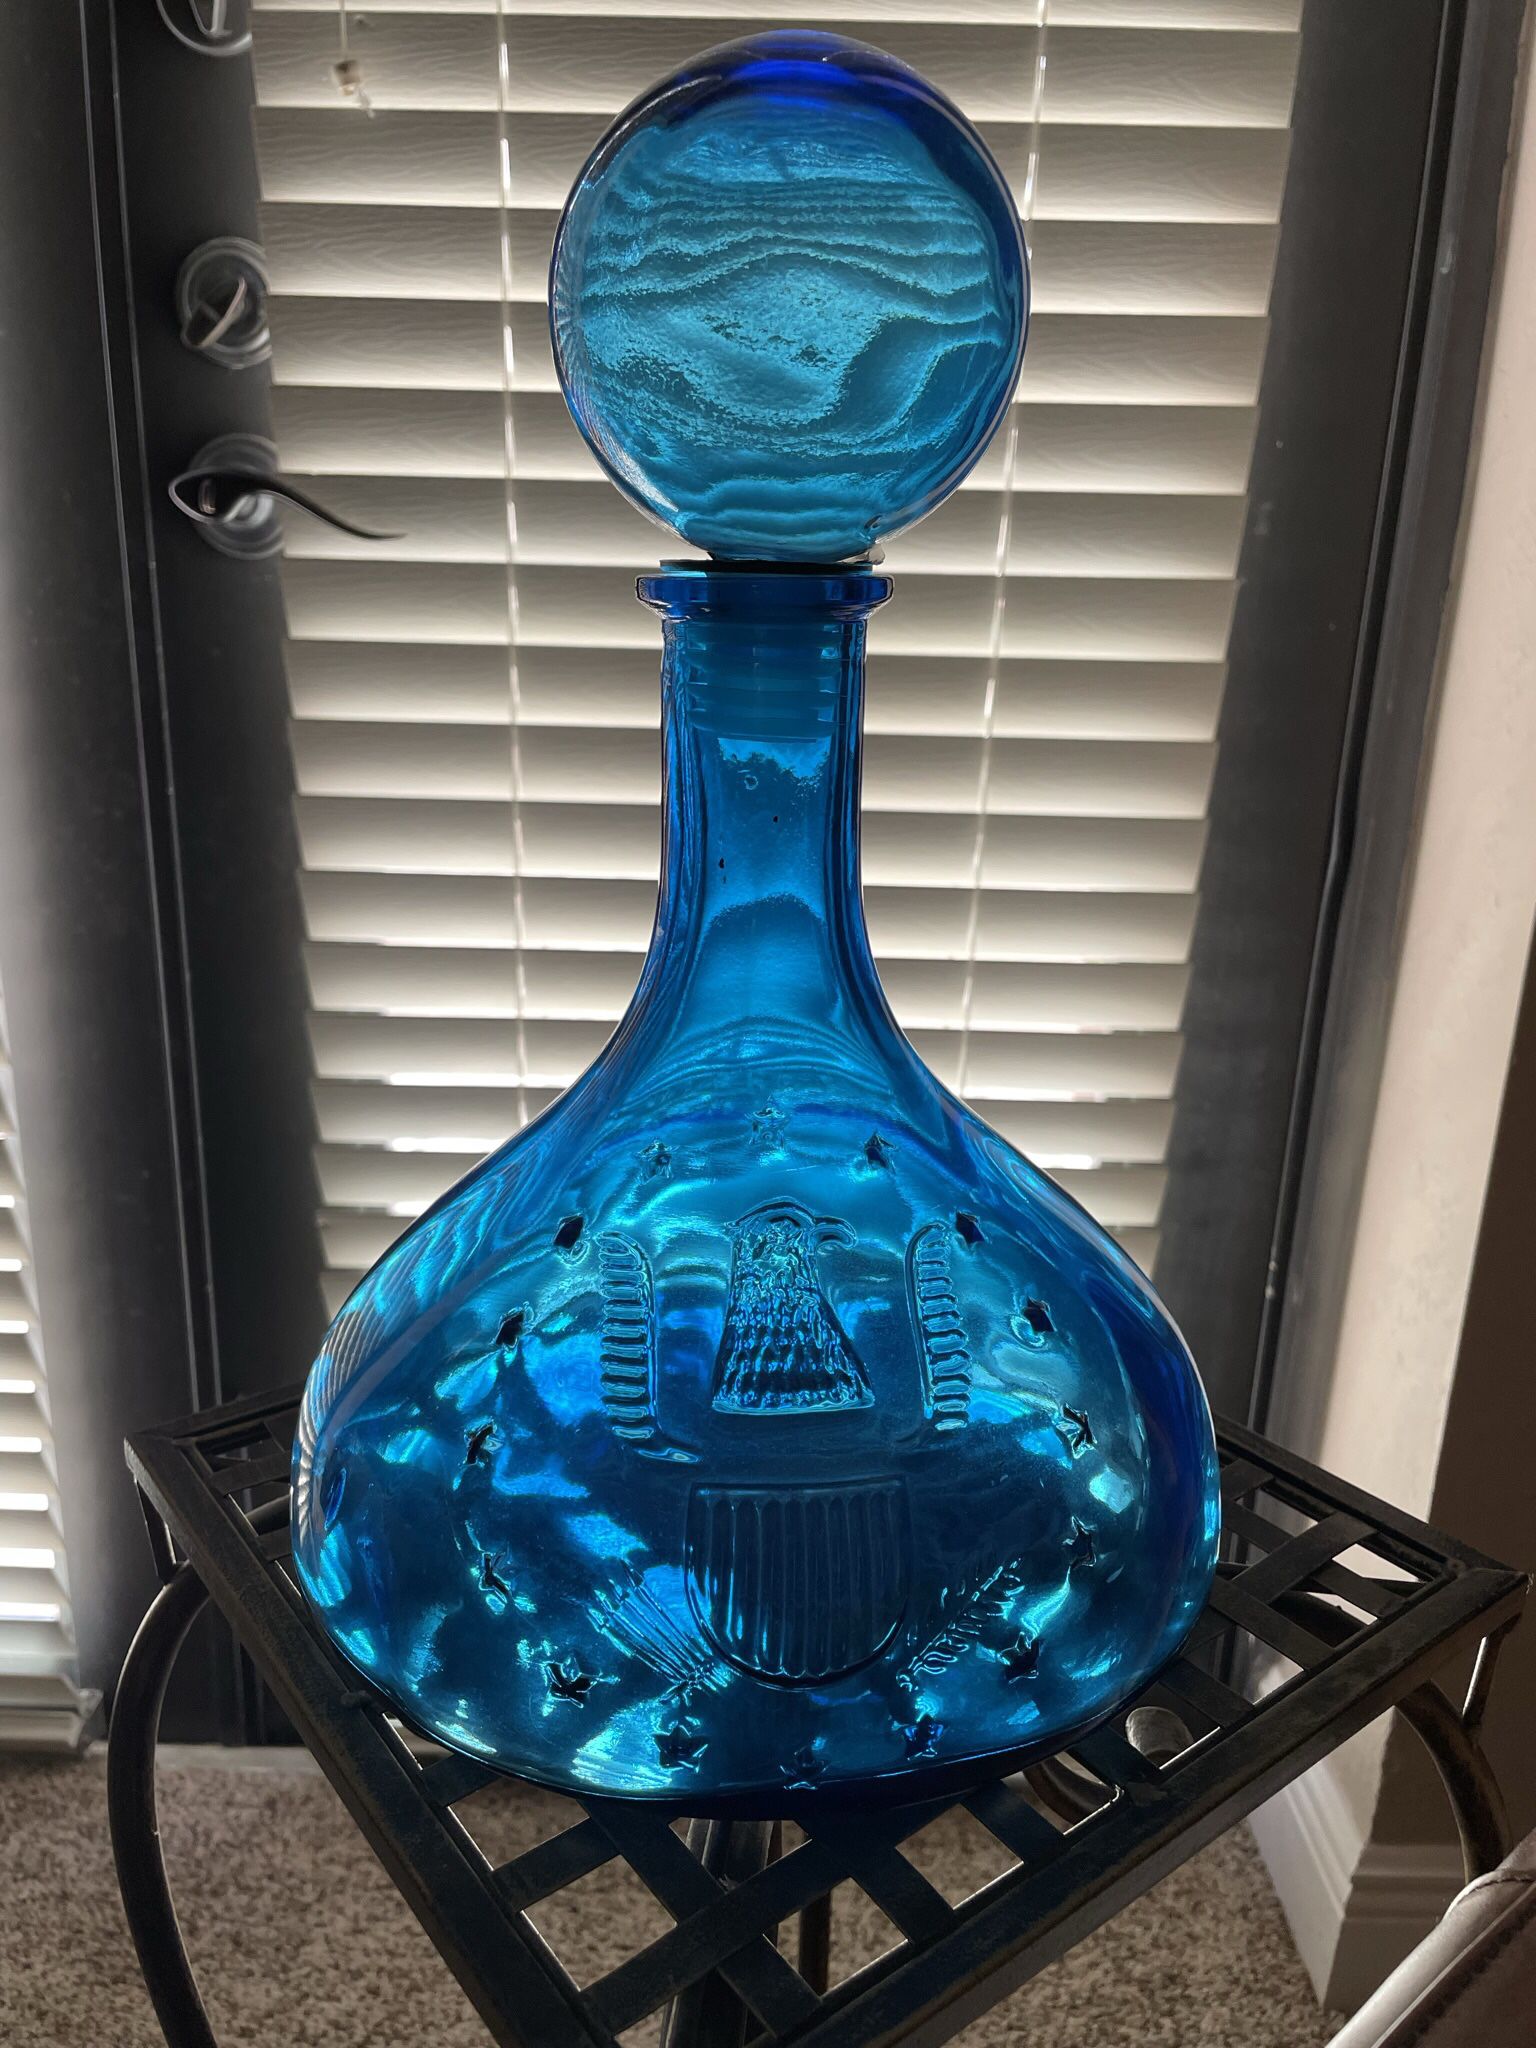 Vintage Large Blue Glass Decanter With American Eagle and "Freedom For Our Ship" On Bottle 